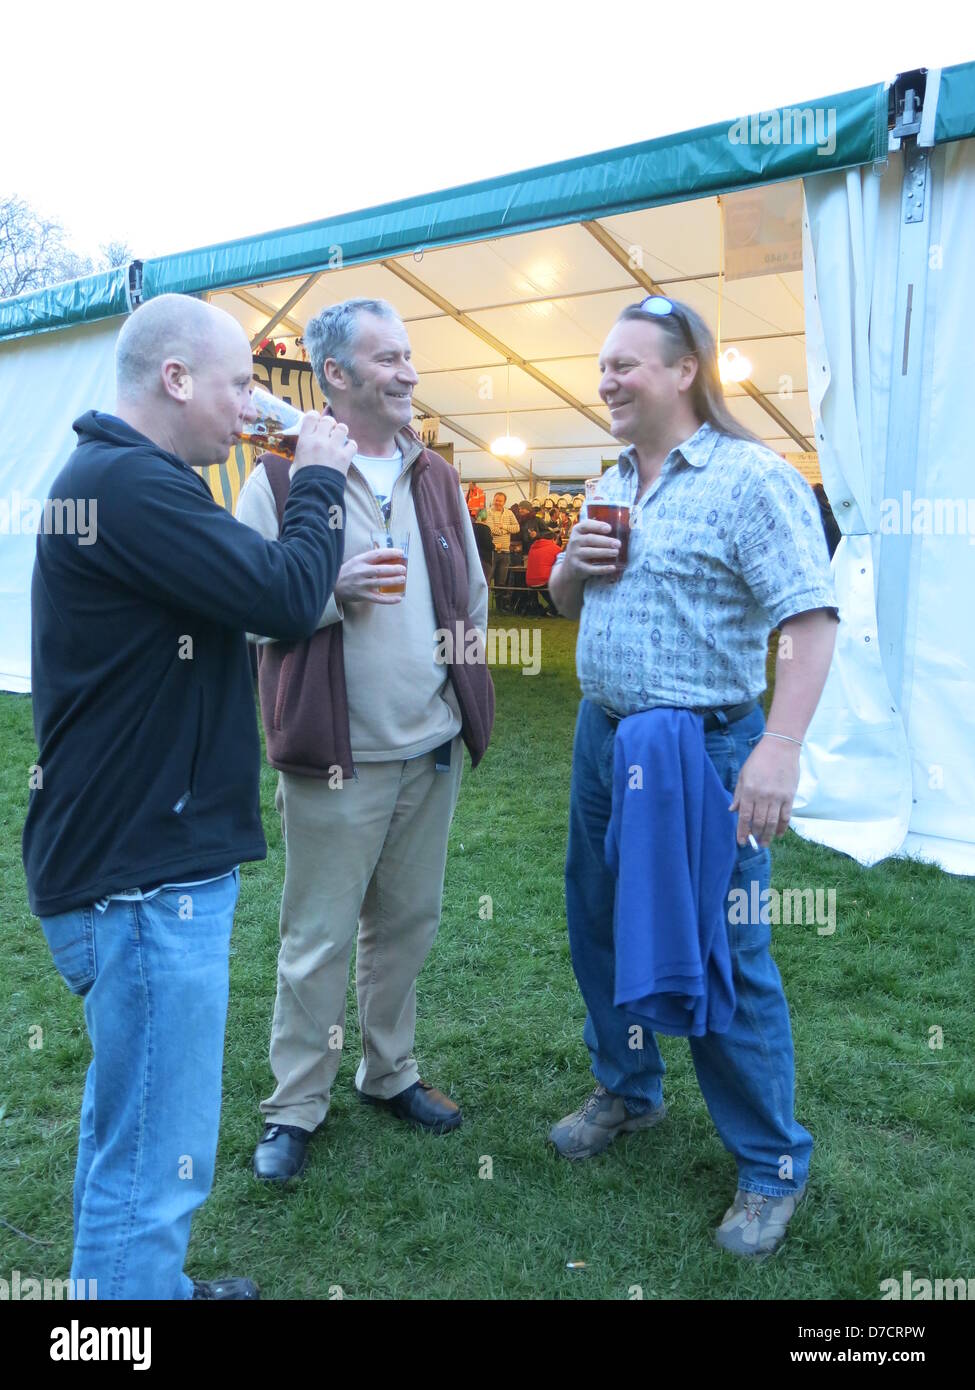 Reading, Berkshire, UK. 3rd May 2013. Celebrating it's 19th year, the Reading Beer & Cider Festival running from Thursday 2nd to Sunday 5th May, welcomes habitual drinkers and new comers alike.    Old friendships are rekindled and new friends made whilst listening to live music, tasting great food and of course sampling some of the 550 real ales, and 150 ciders and perries, on offer. Credit:  Sarah Tubb / Alamy Live News Stock Photo